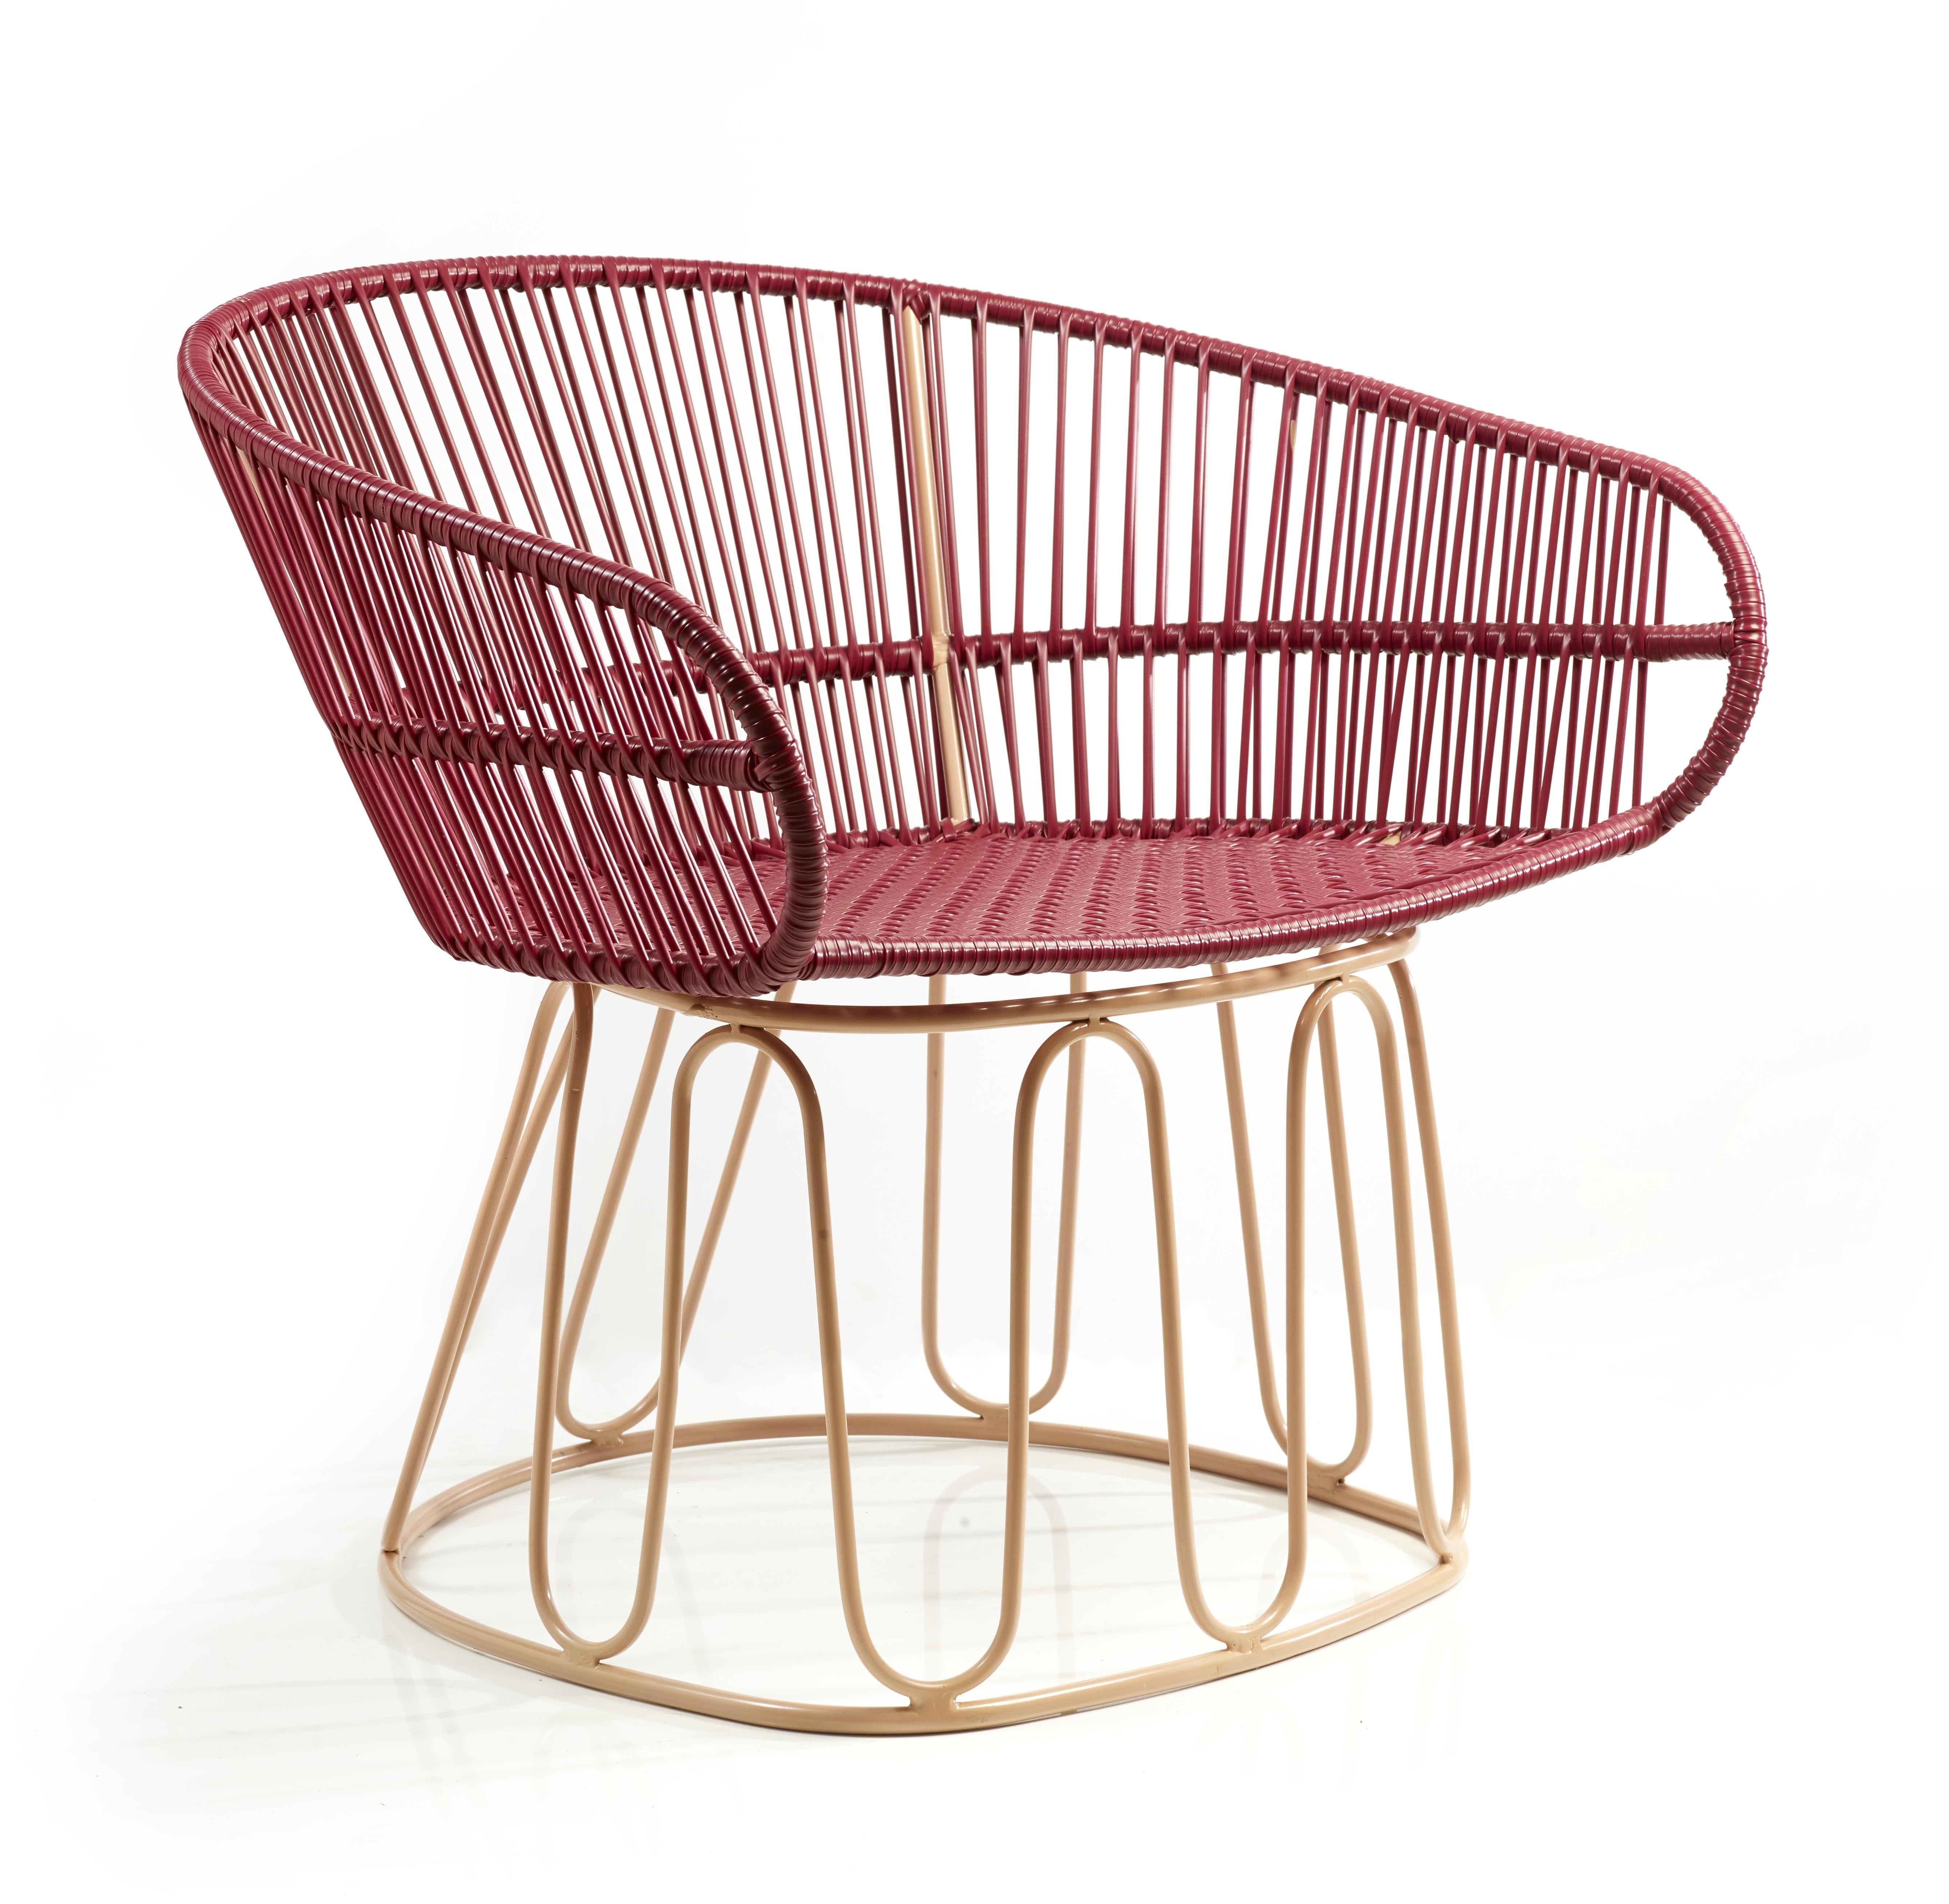 Purple circo lounge chair by Sebastian Herkner
Materials: Galvanized and powder-coated tubular steel. PVC strings.
Technique: Made from recycled plastic. Weaved by local craftspeople in Colombia. 
Dimensions: W 74 x D 66.2 x H 73 cm 
Available